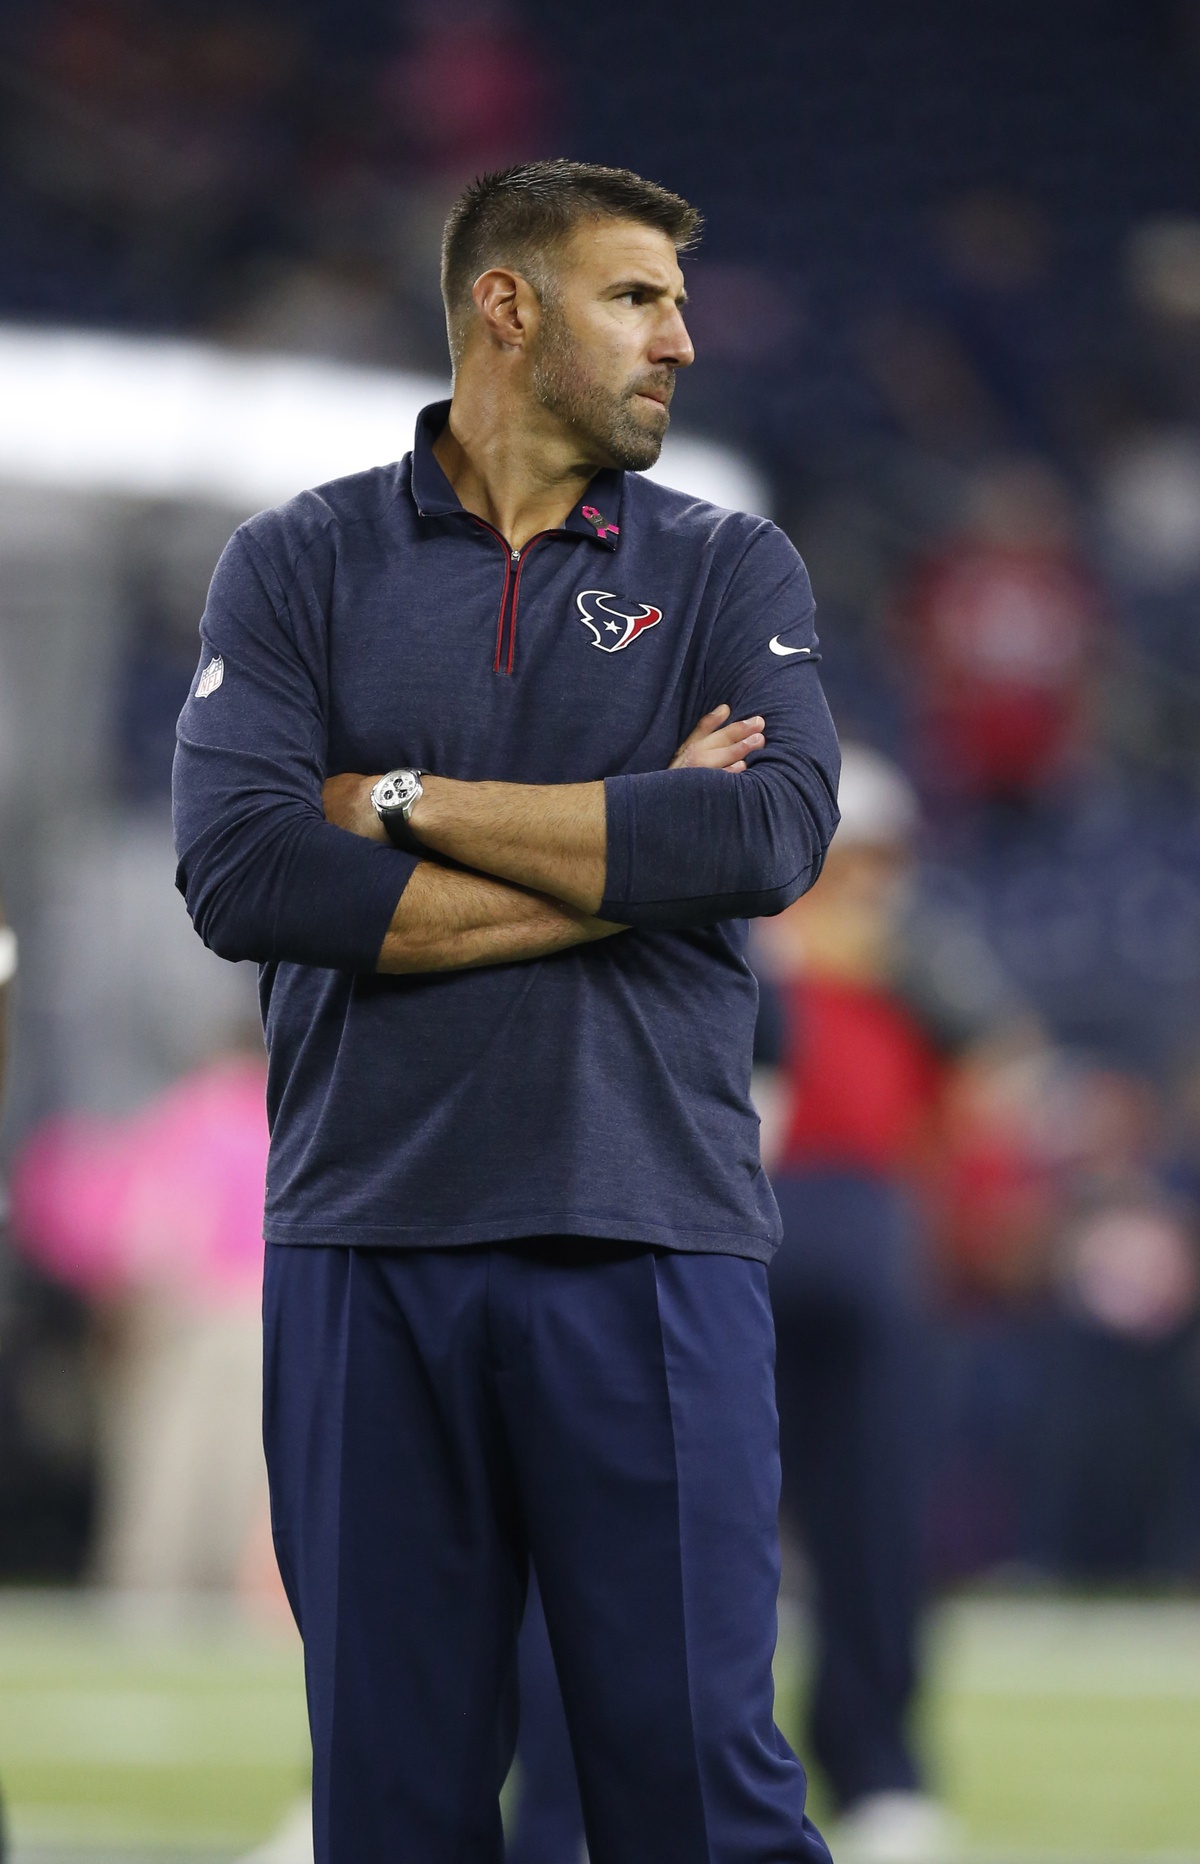 Mike Vrabel Turns Down 49ers, Will Stay With Texans